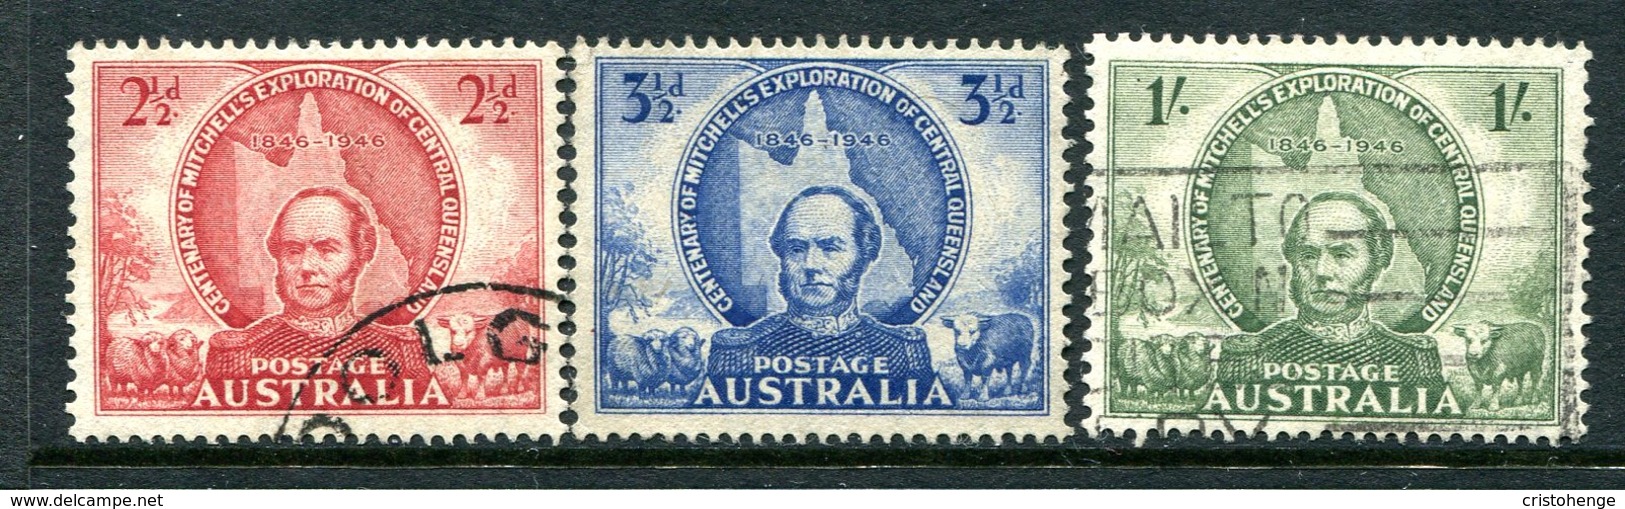 Australia 1946 Centenary Of Mitchell's Exploration Of Central Queensland Set Used (SG 216-218) - Oblitérés